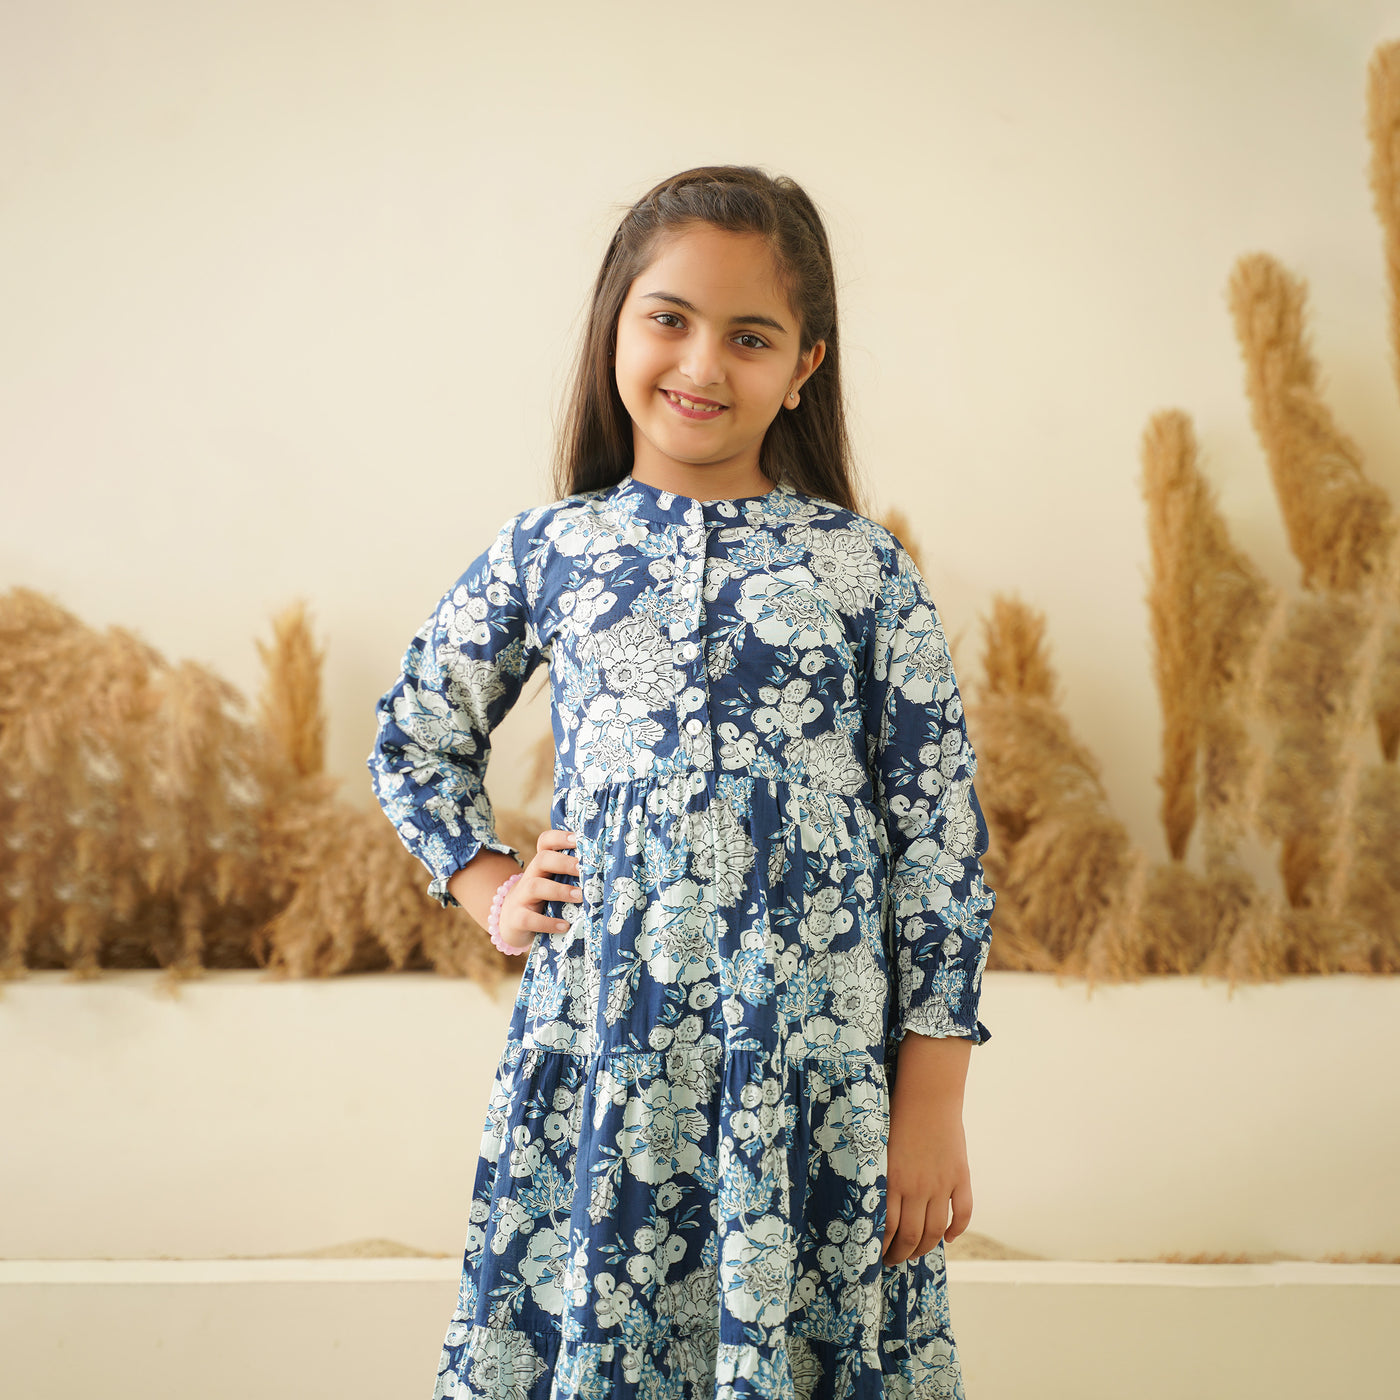 Floral Breeze 3-Tiered Girl's Cotton Dress